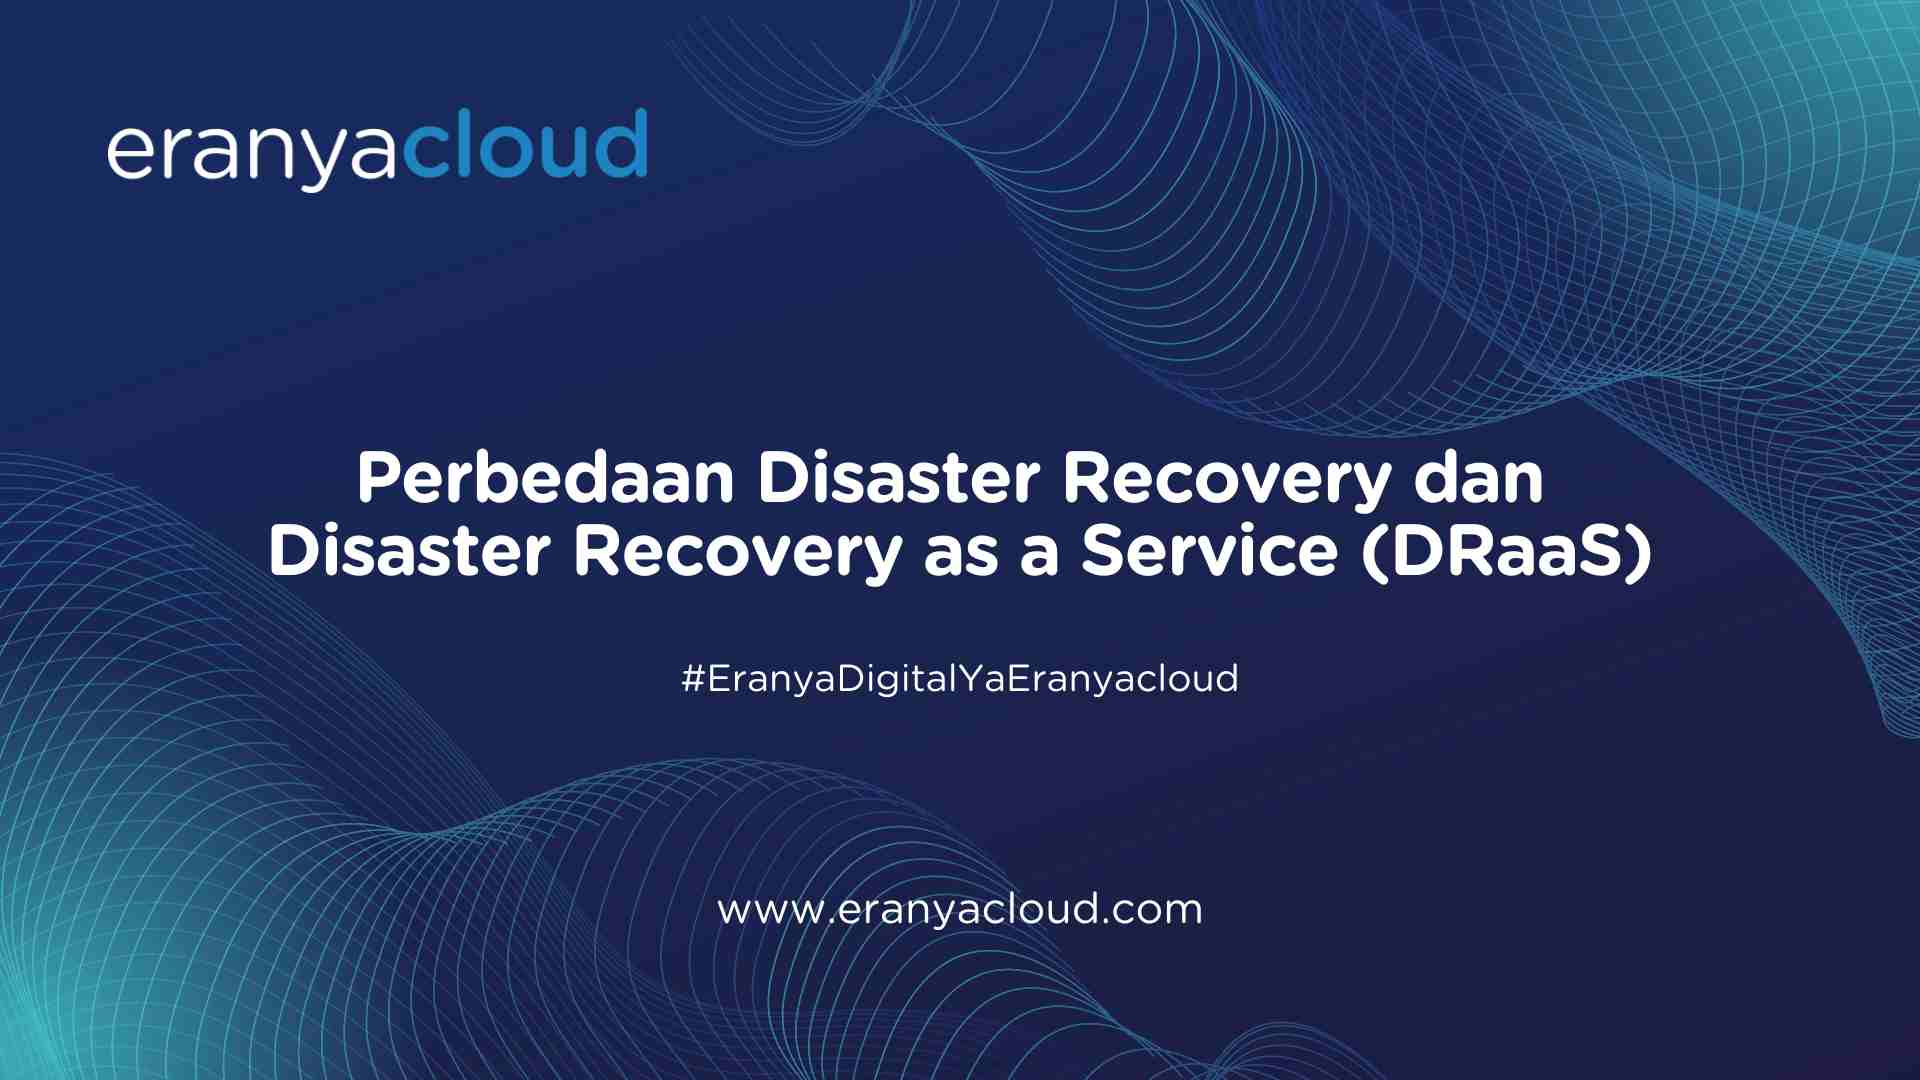 Perbedaan Disaster Recovery dan Disaster Recovery as a Service (DRaaS)